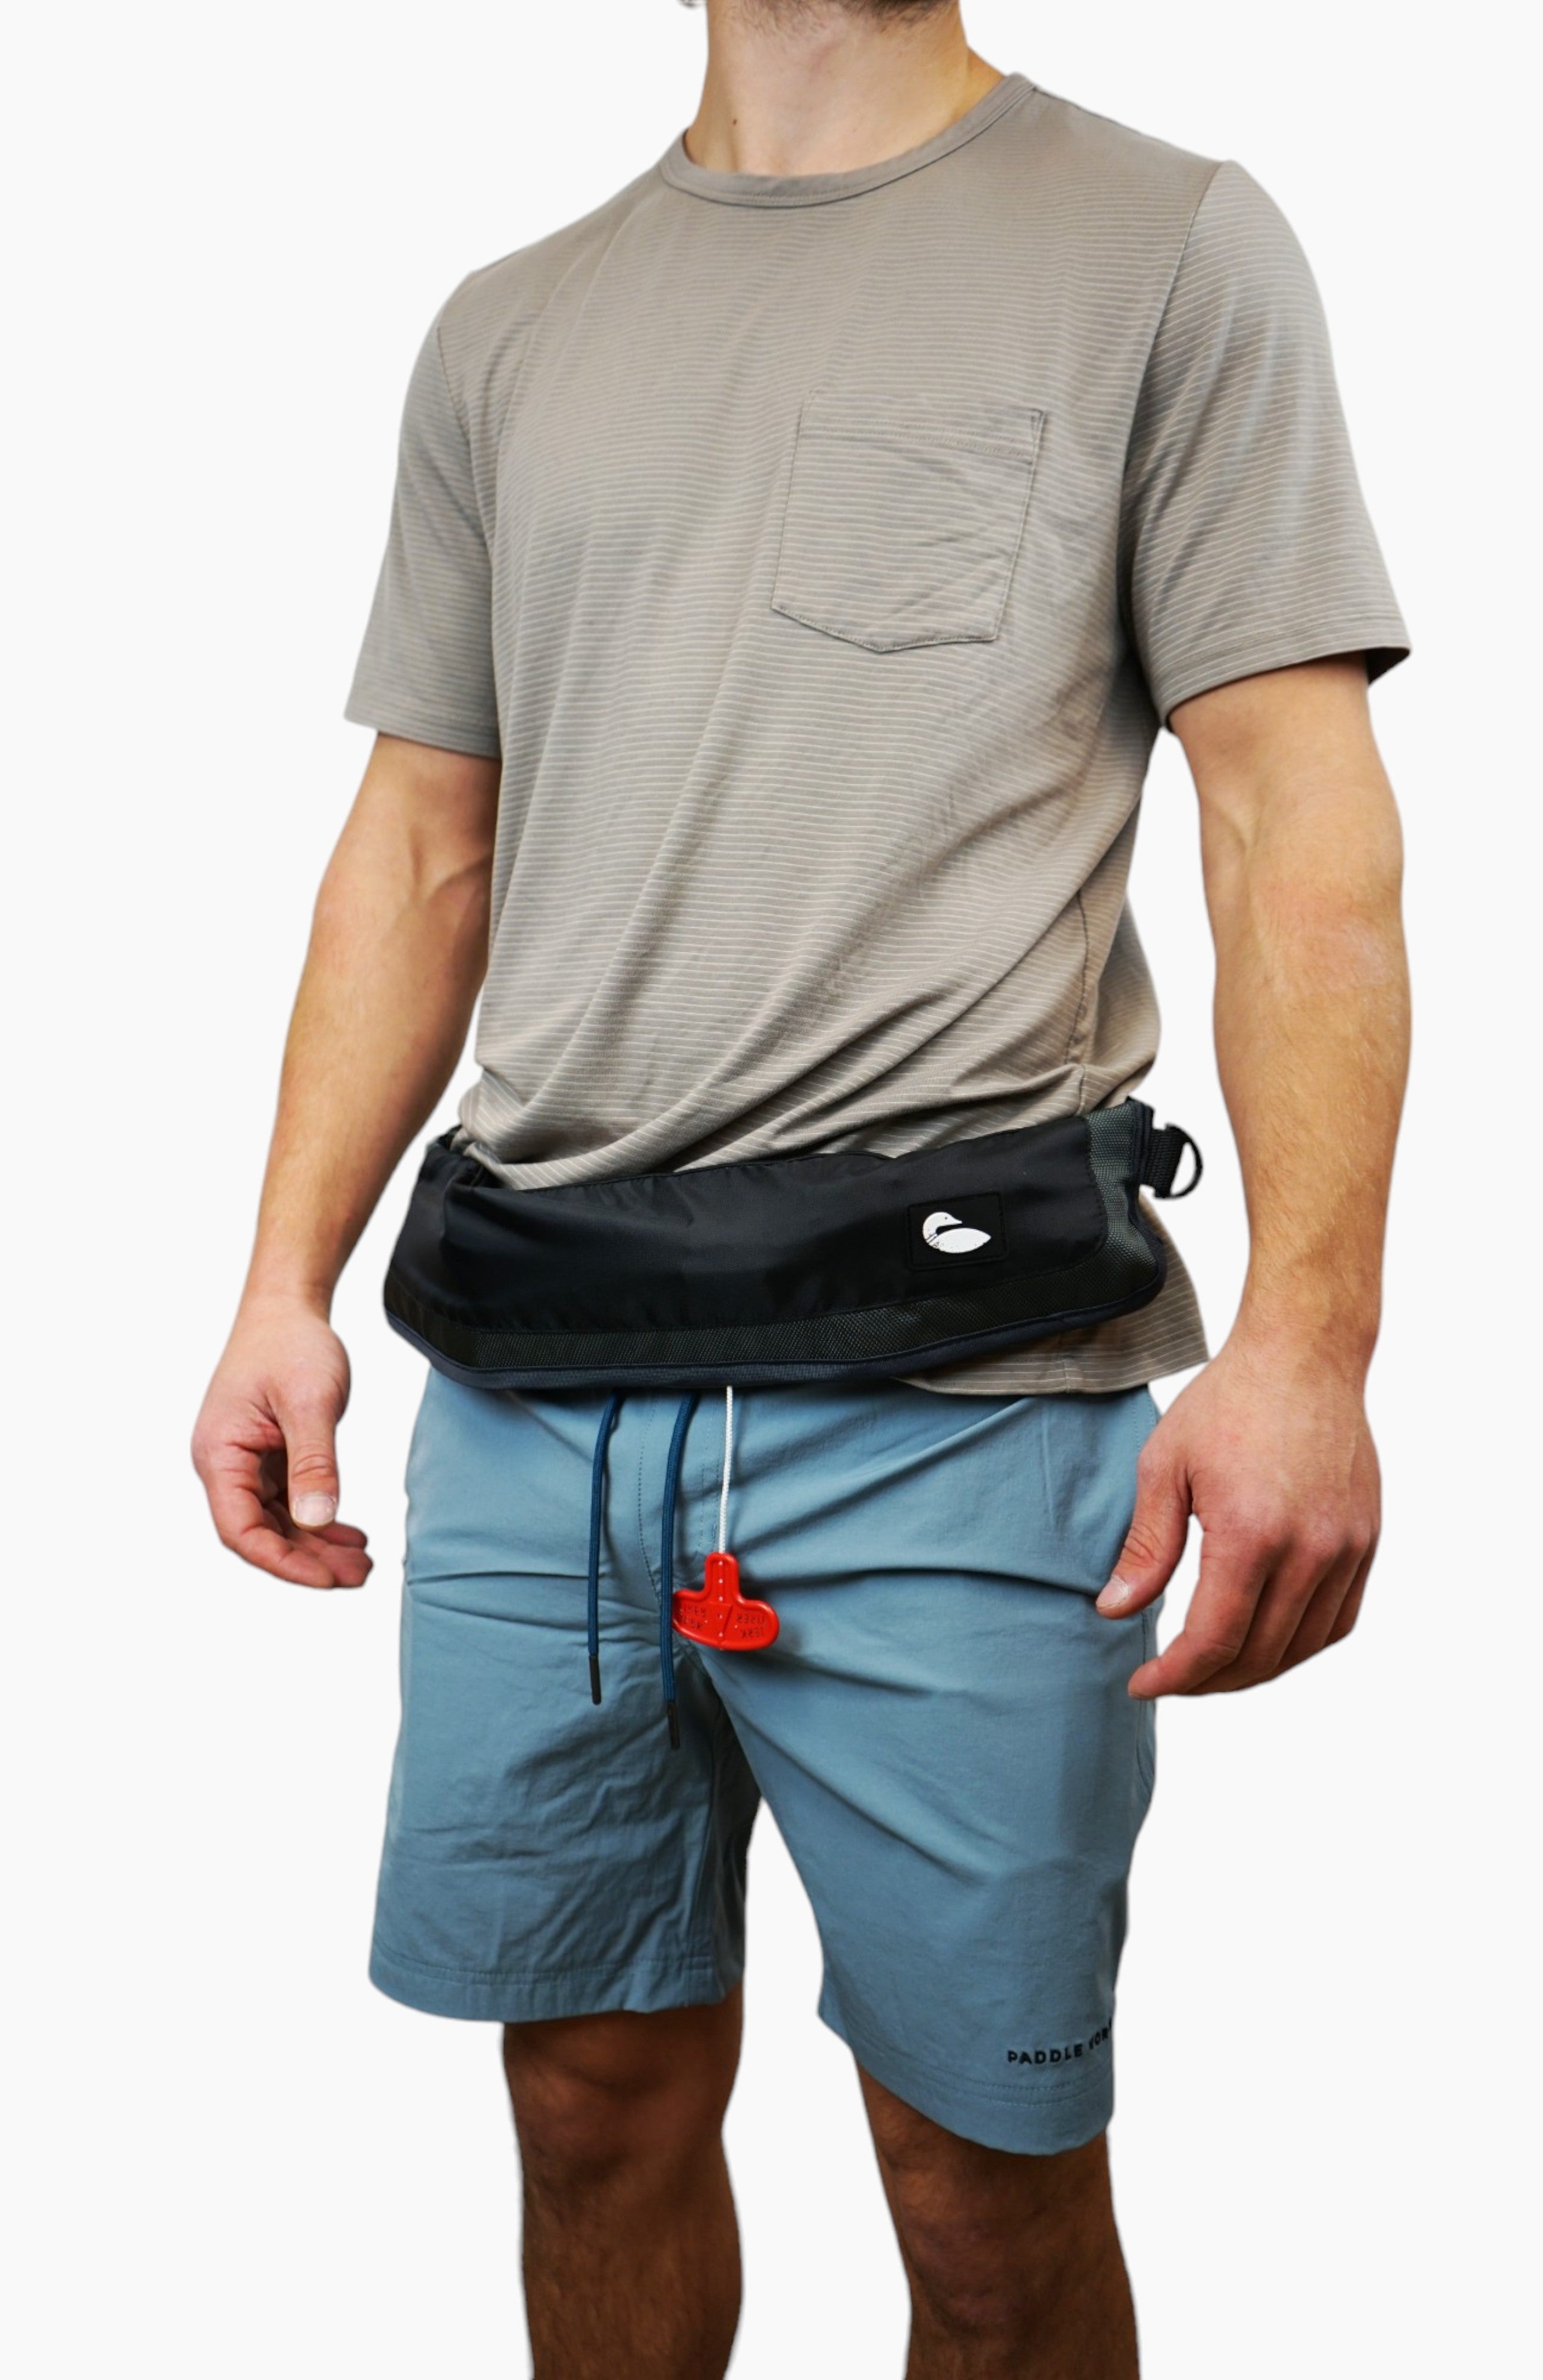 Water accessories: man wearing an inflatable life jacket stored in a black bag worn like a belt.